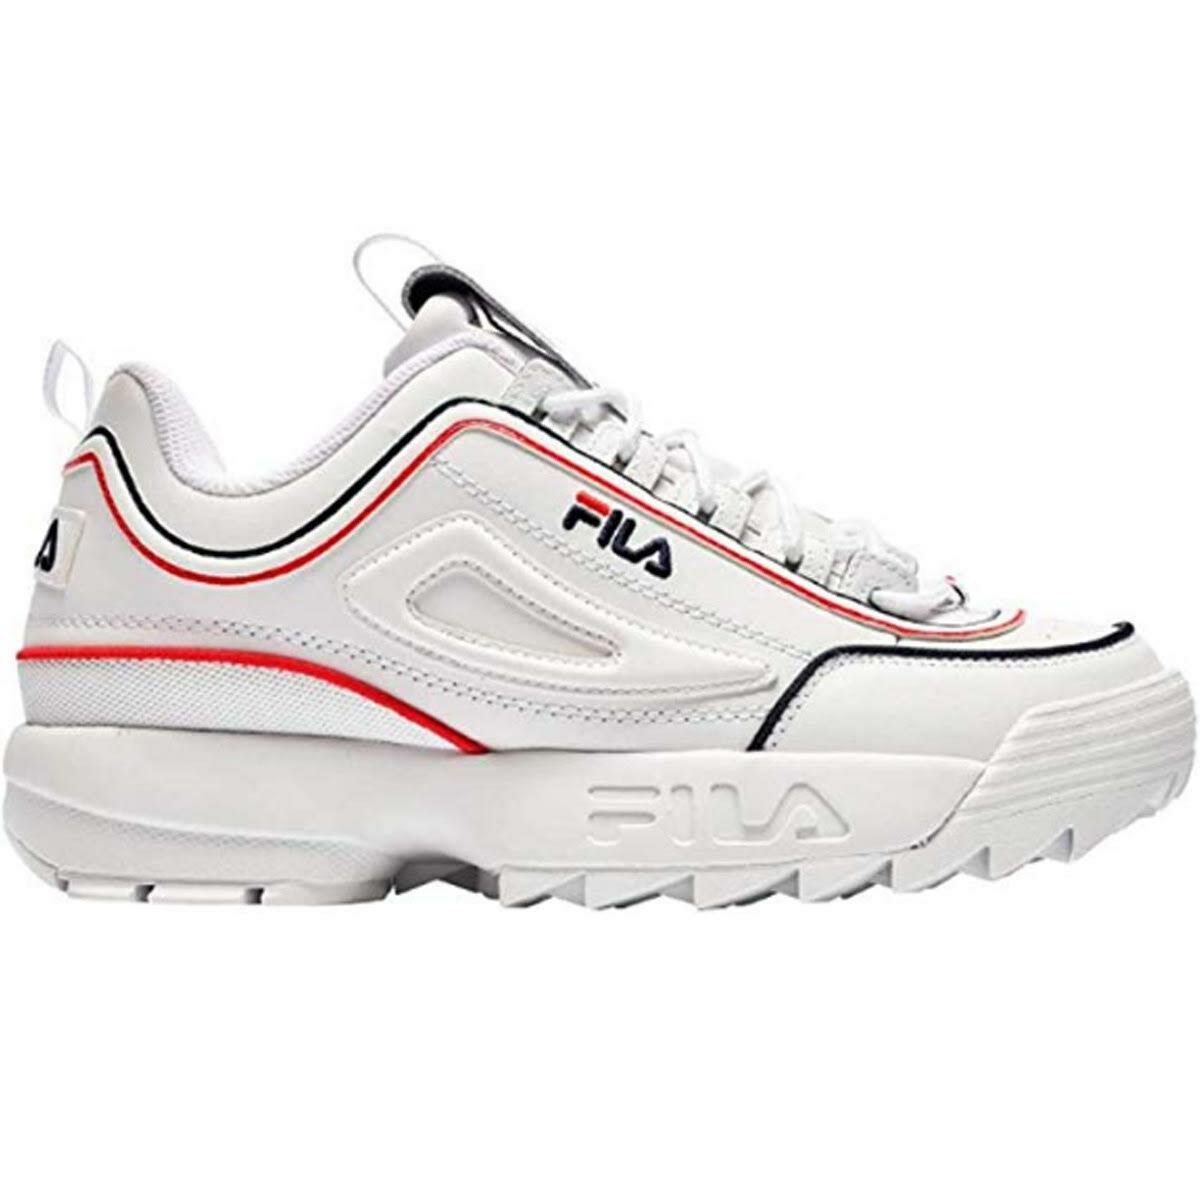 Fila Disruptor II Contast Piping Men`s White 125 Athletic Sneaker Shoes